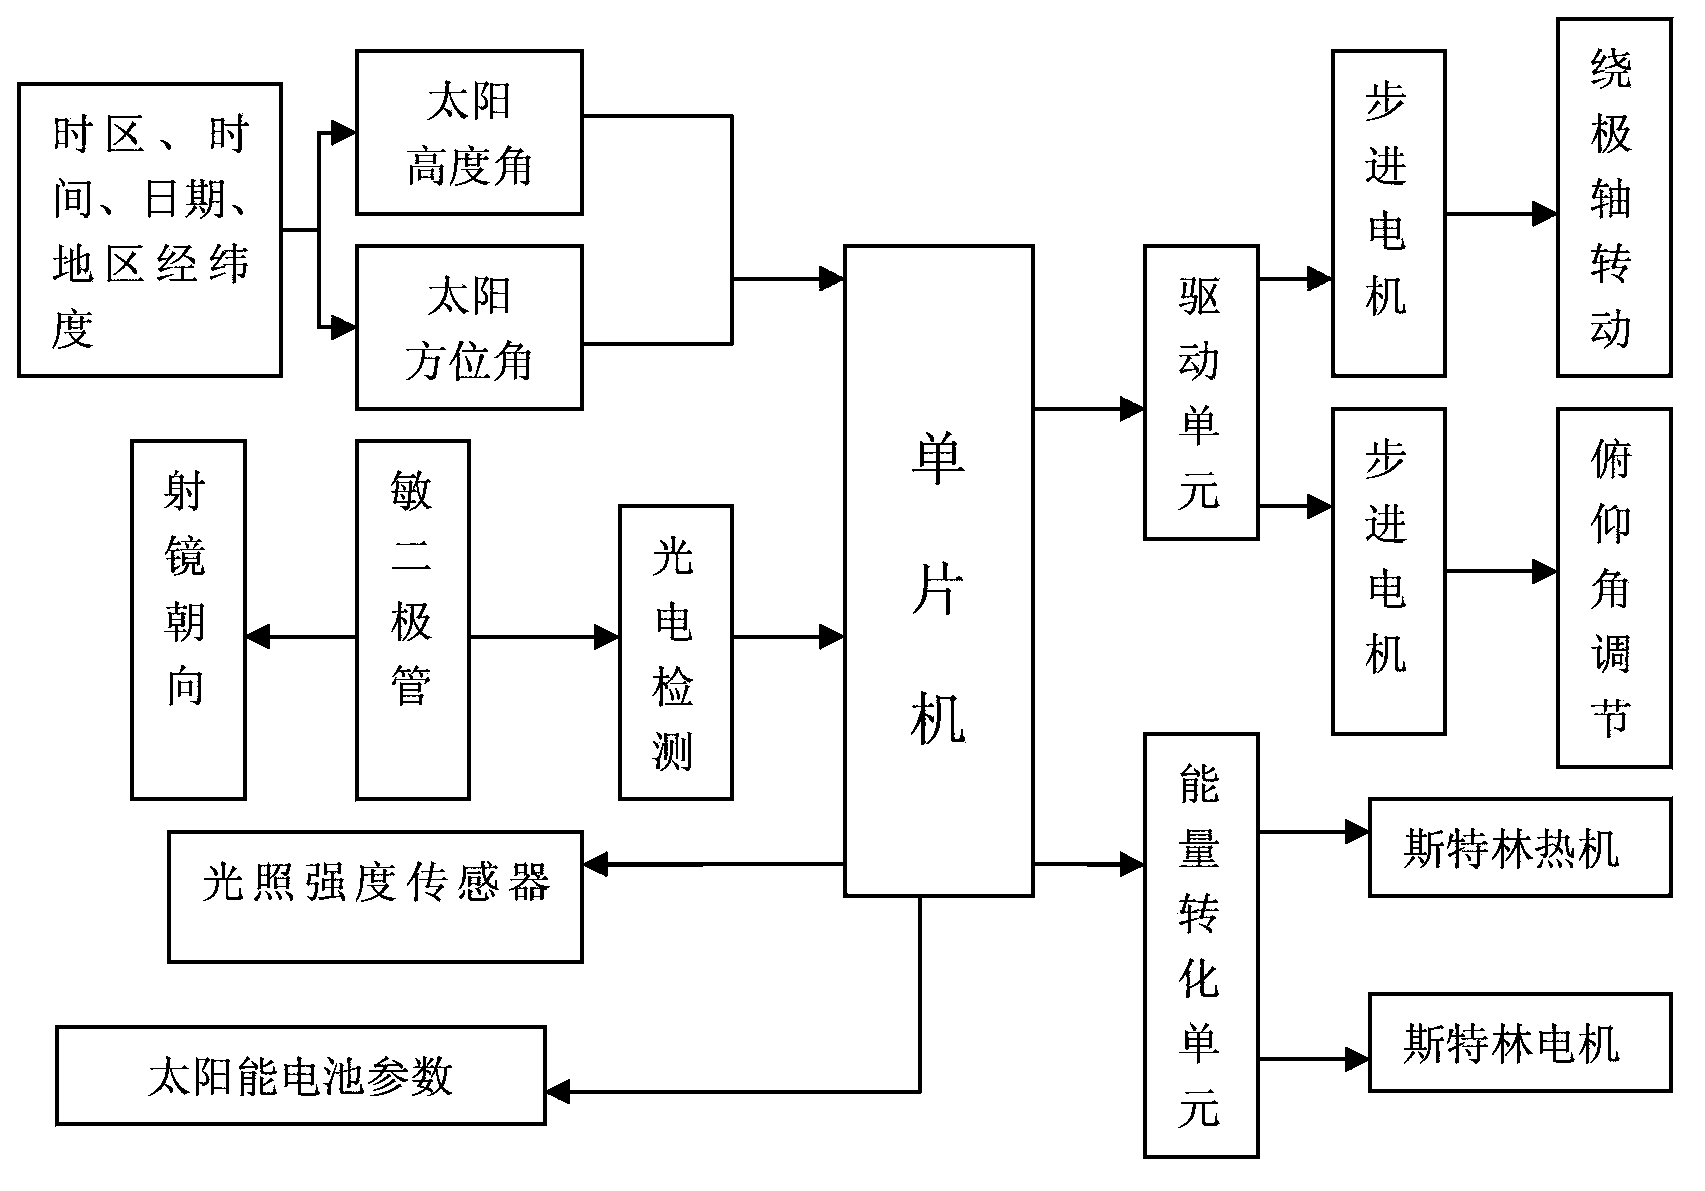 Control circuit of solar power generation tracking system